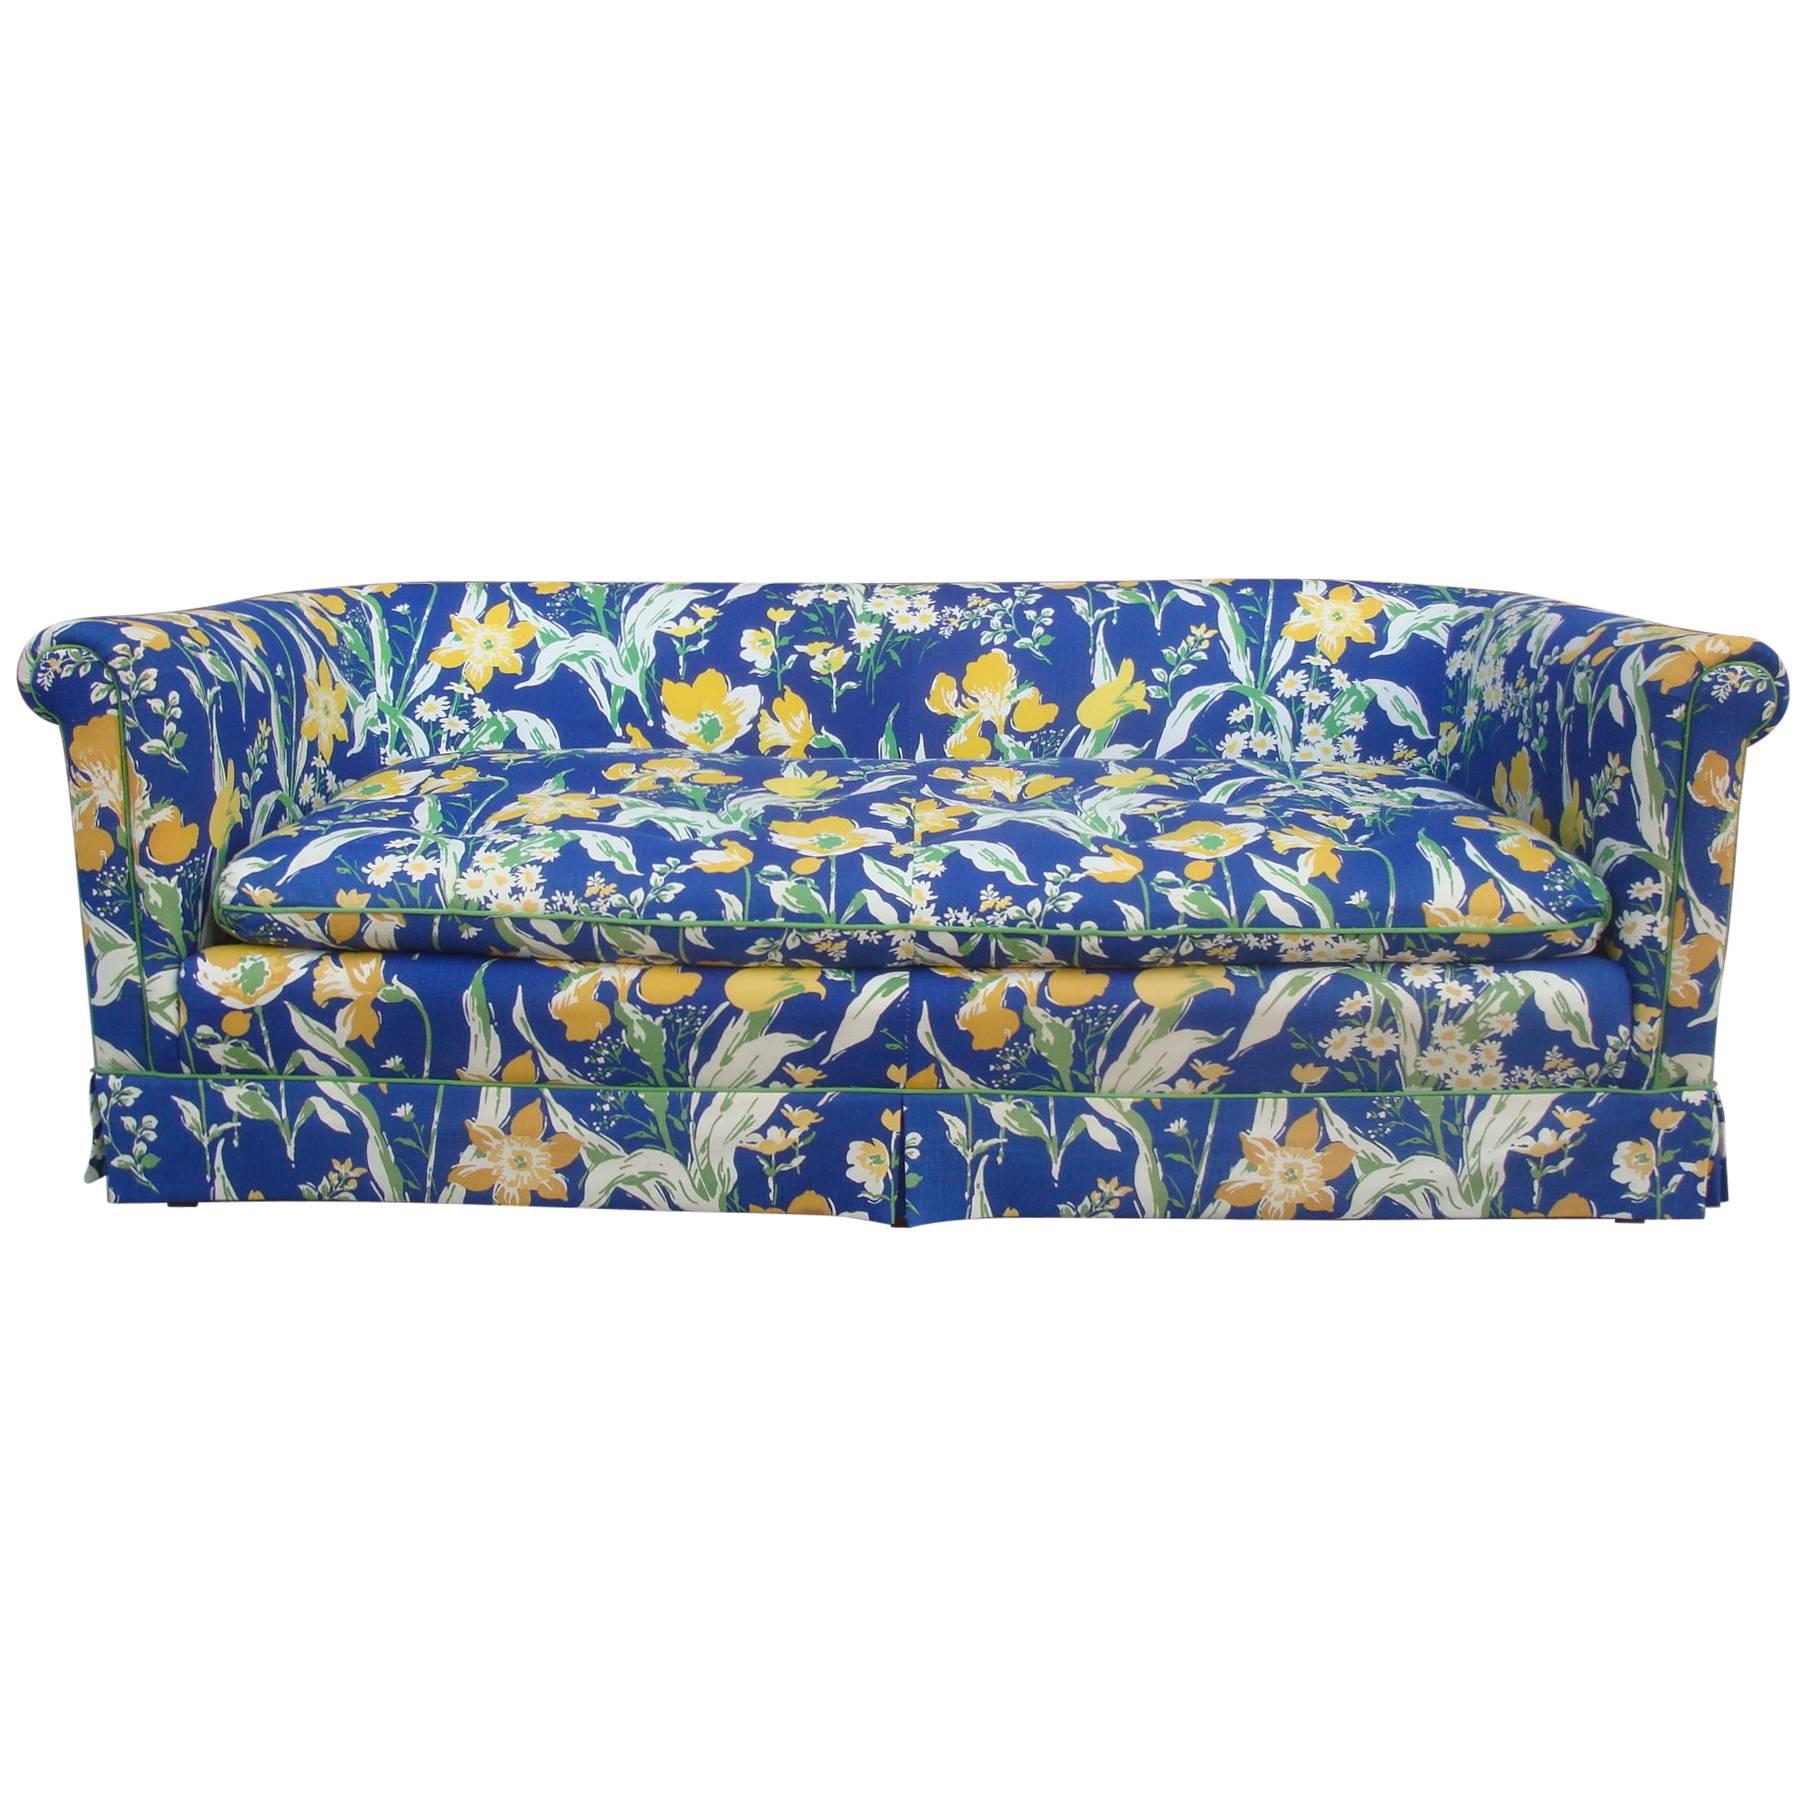 1970s Blue and Yellow Floral Motif Sofa by Highland House of Hickory